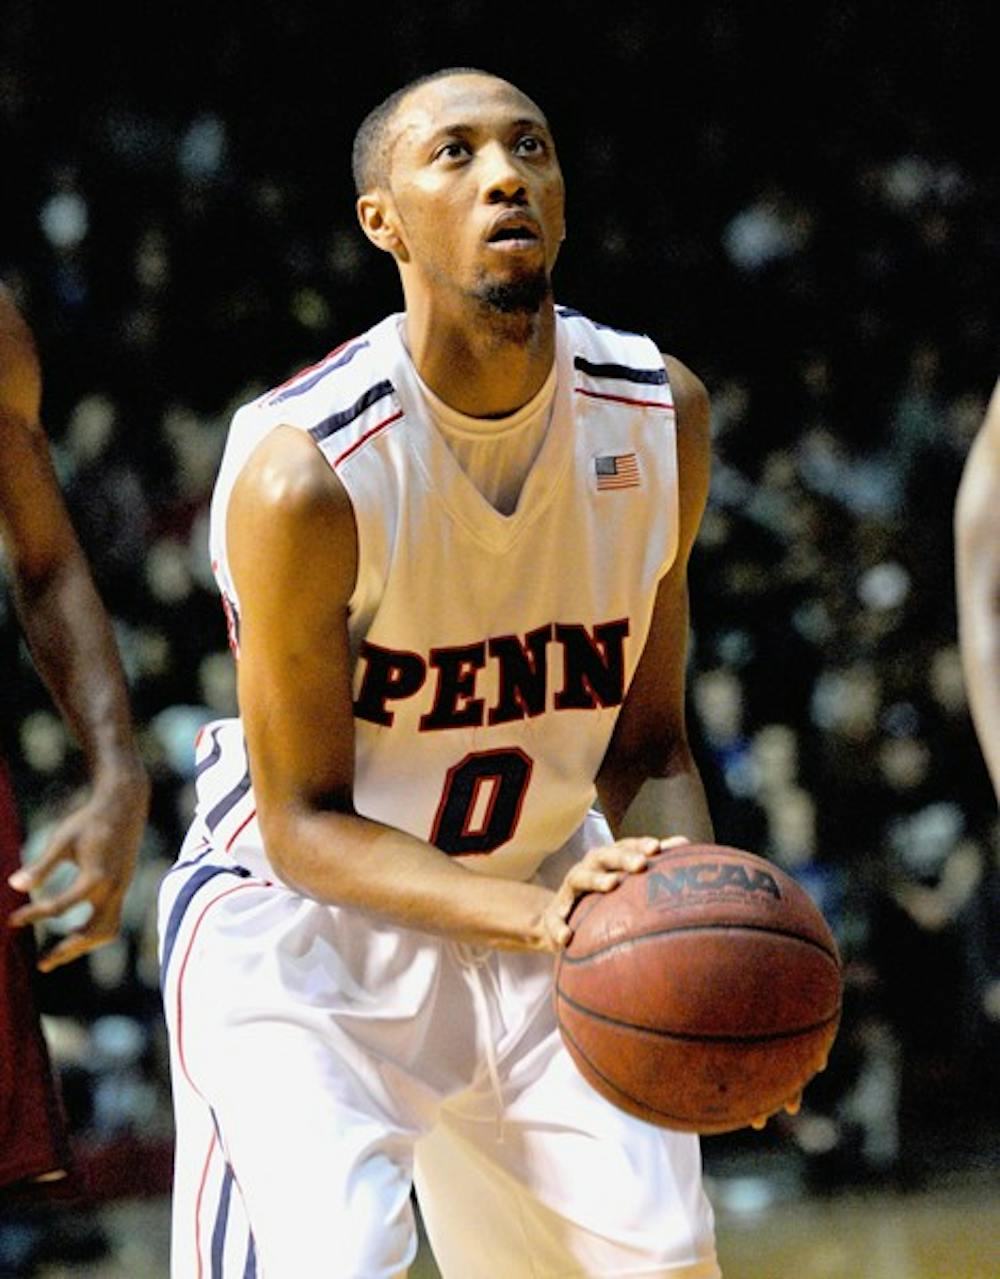 Penn Men's Basketball Loses 78-73 to Temple